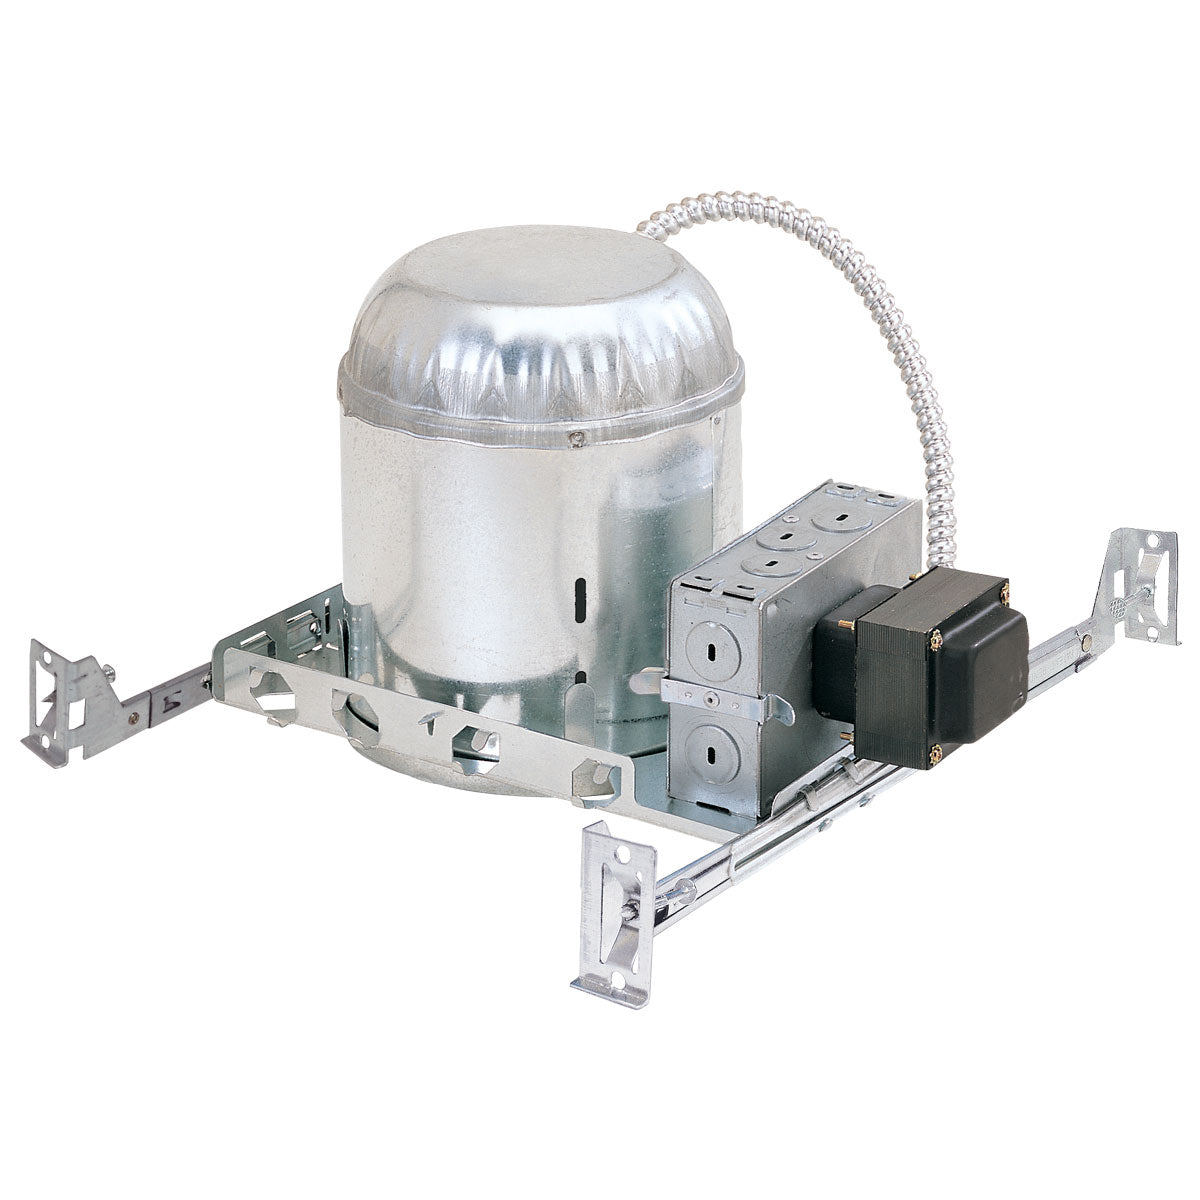 Nora Lighting NL-601/2EL - Recessed - 6 Inch Low Voltage Housing, 277V/12V Elect. Transformer, Rated for 50W